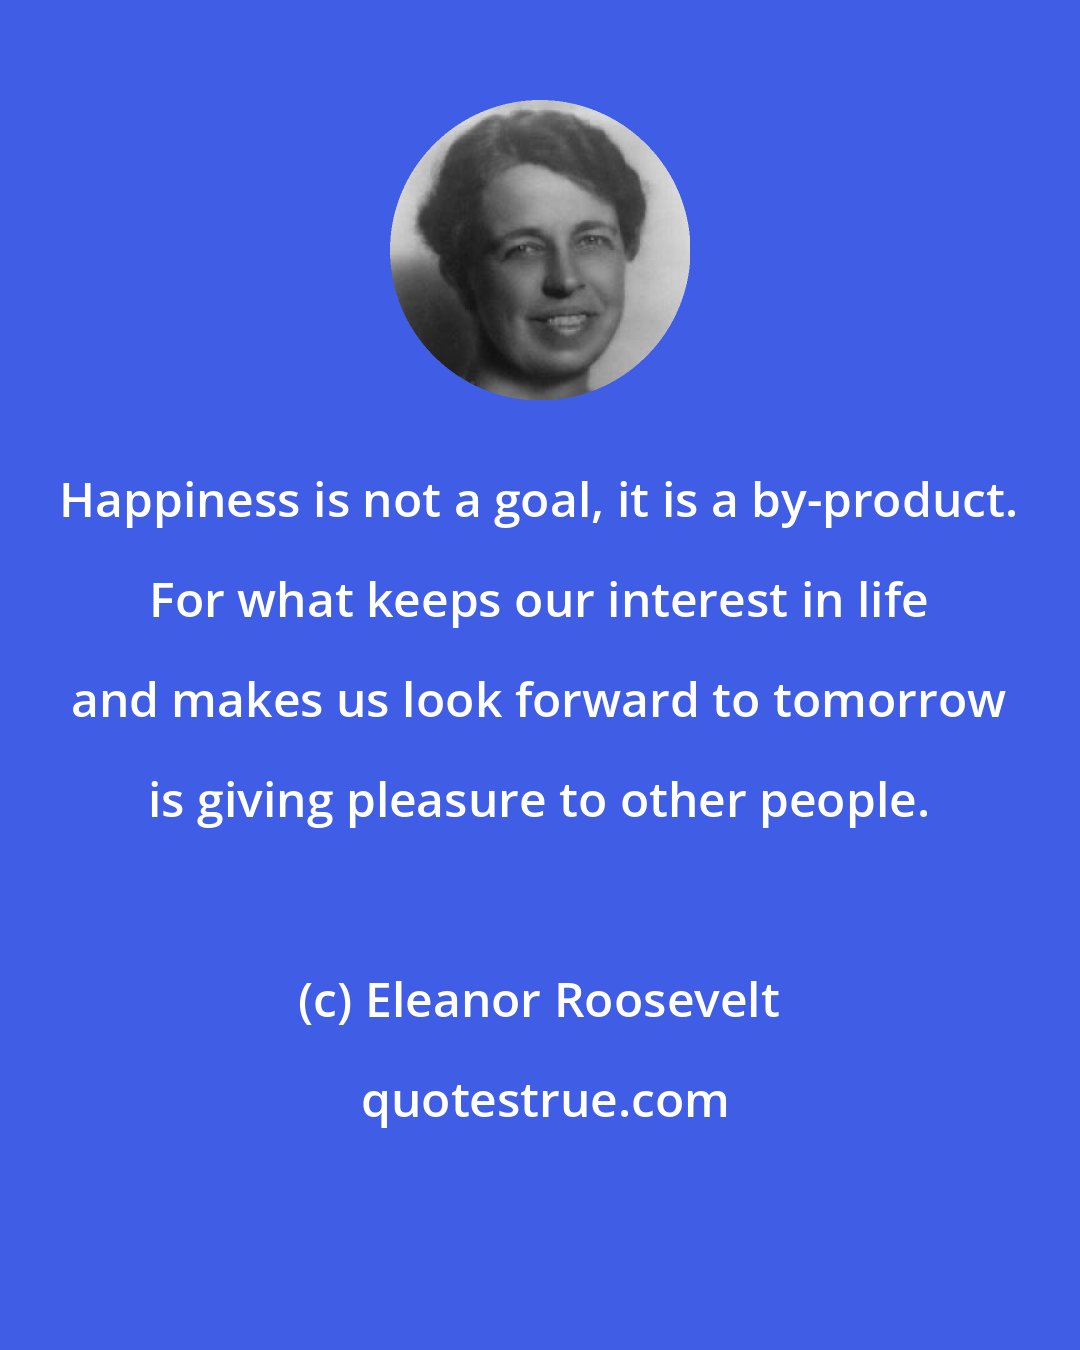 Eleanor Roosevelt: Happiness is not a goal, it is a by-product. For what keeps our interest in life and makes us look forward to tomorrow is giving pleasure to other people.